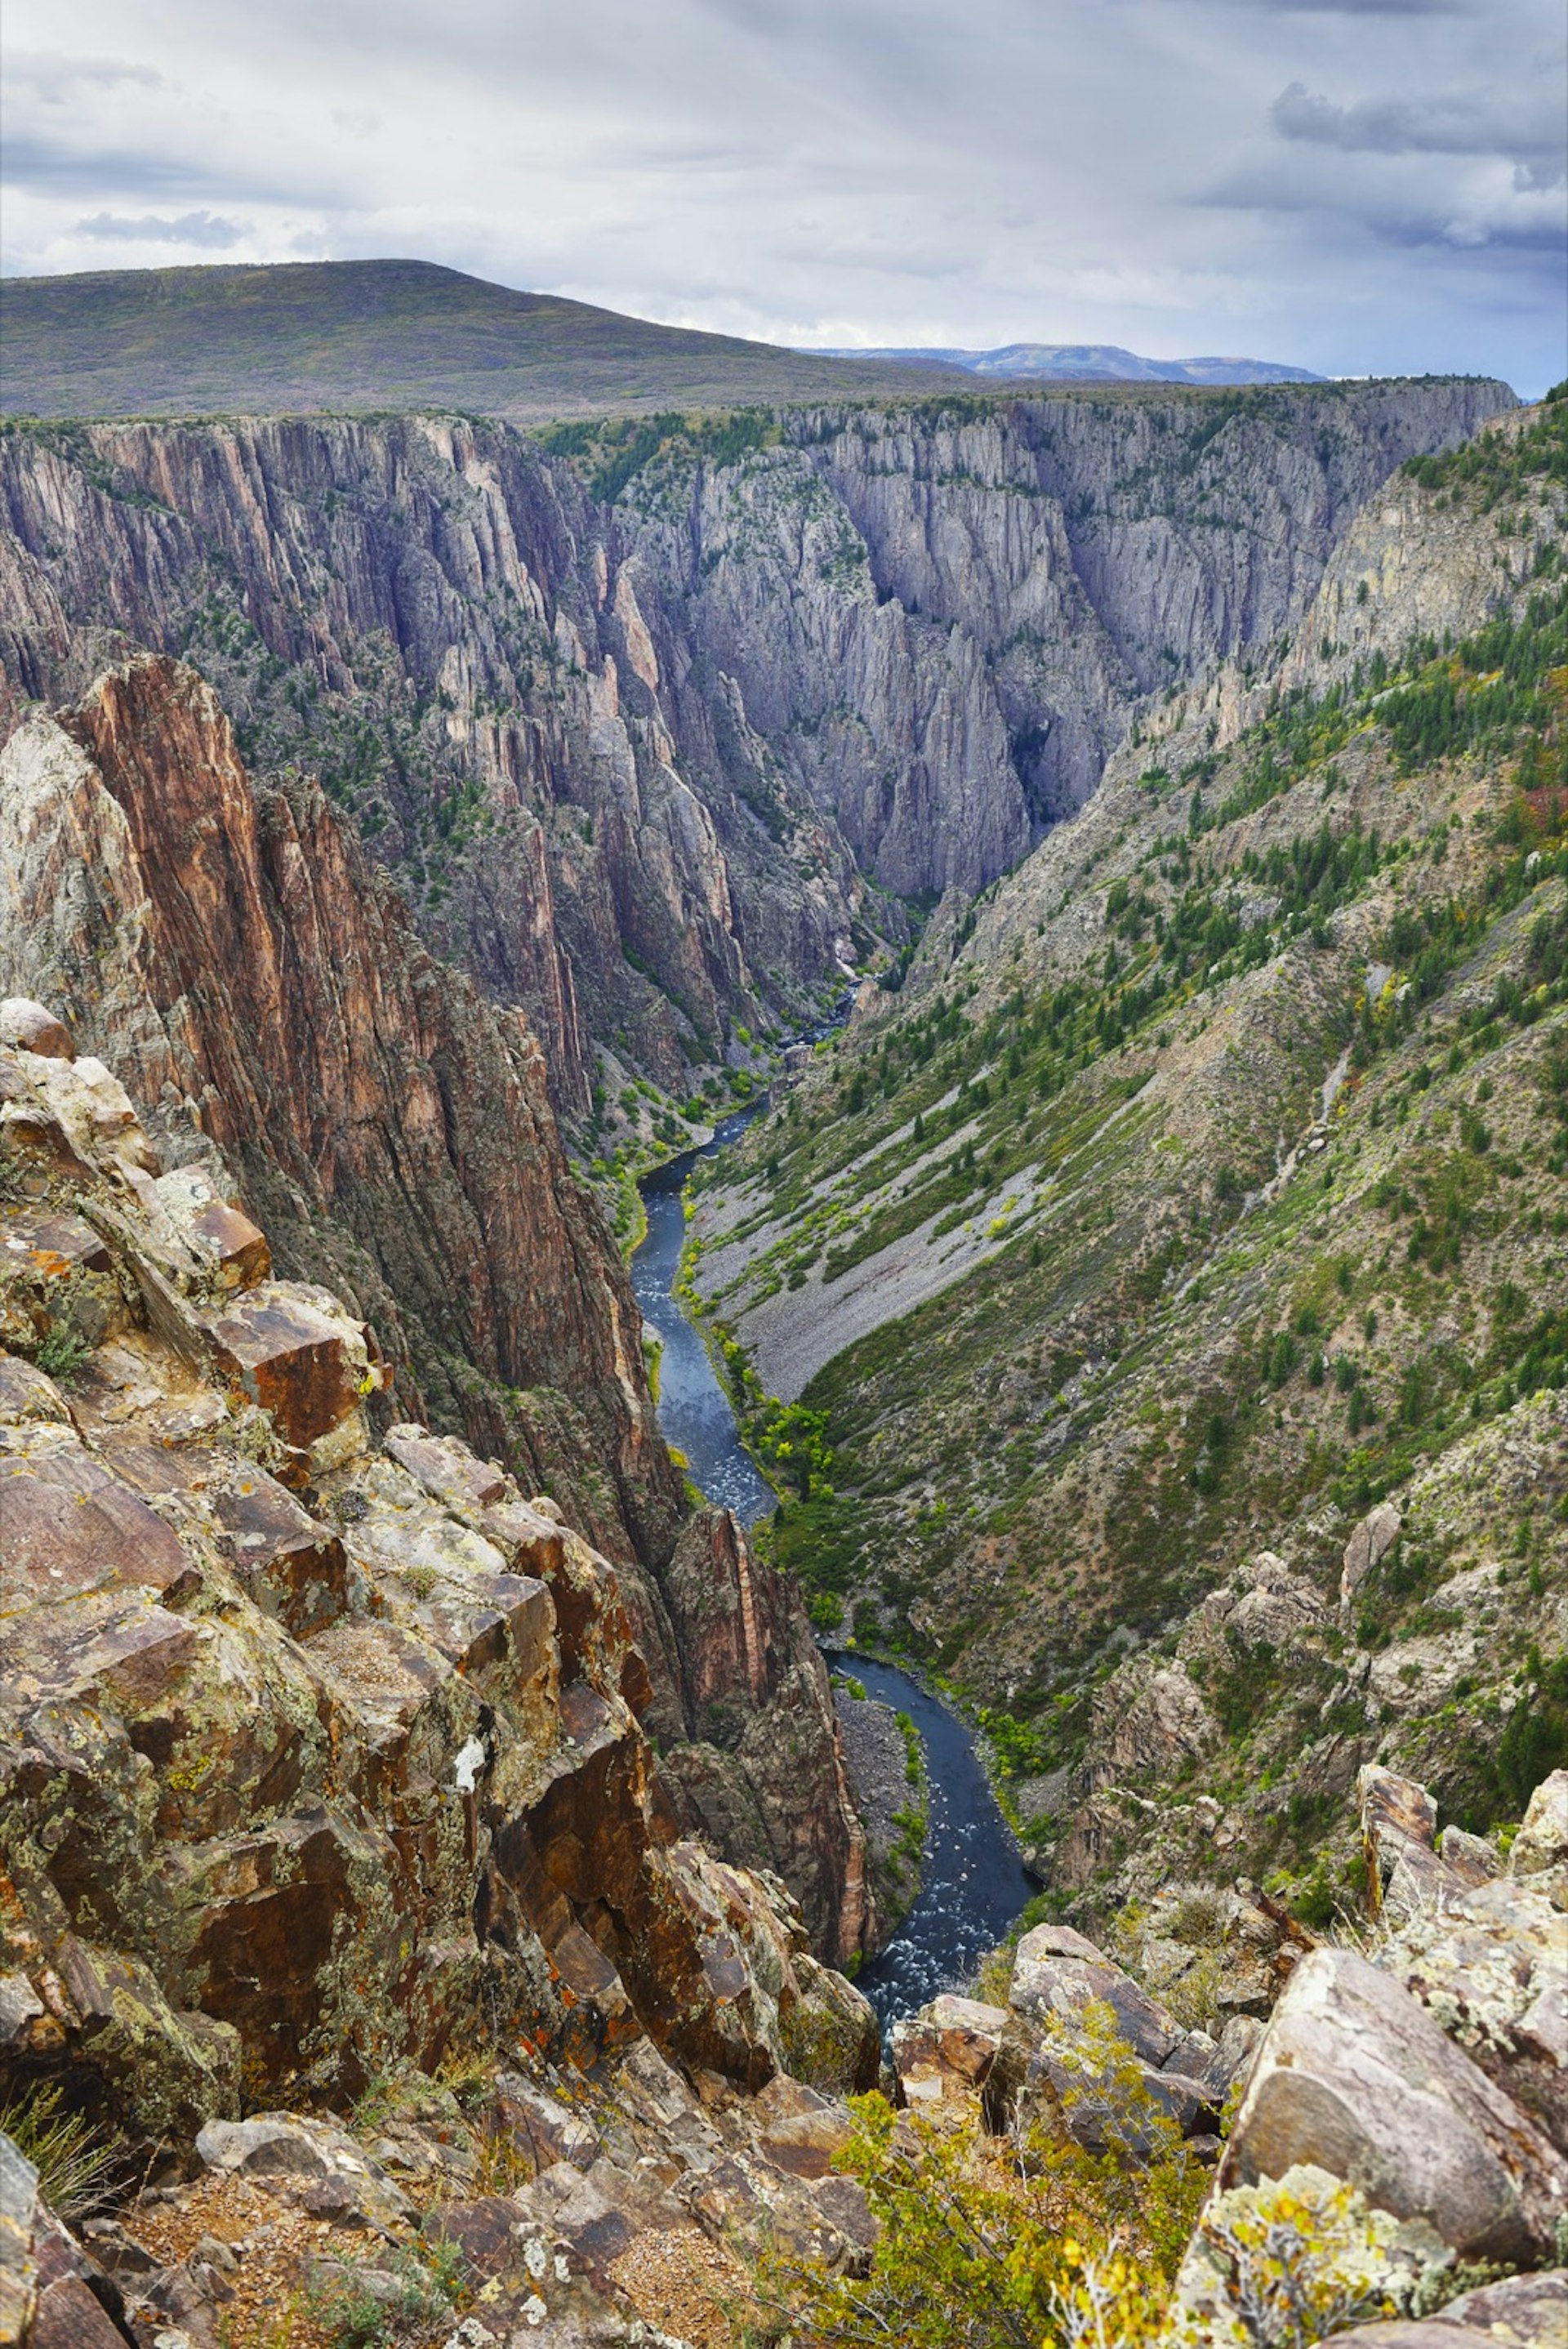 The deep, rocky canyon of the Black Canyon Of The Gunnison National Park in Colorado